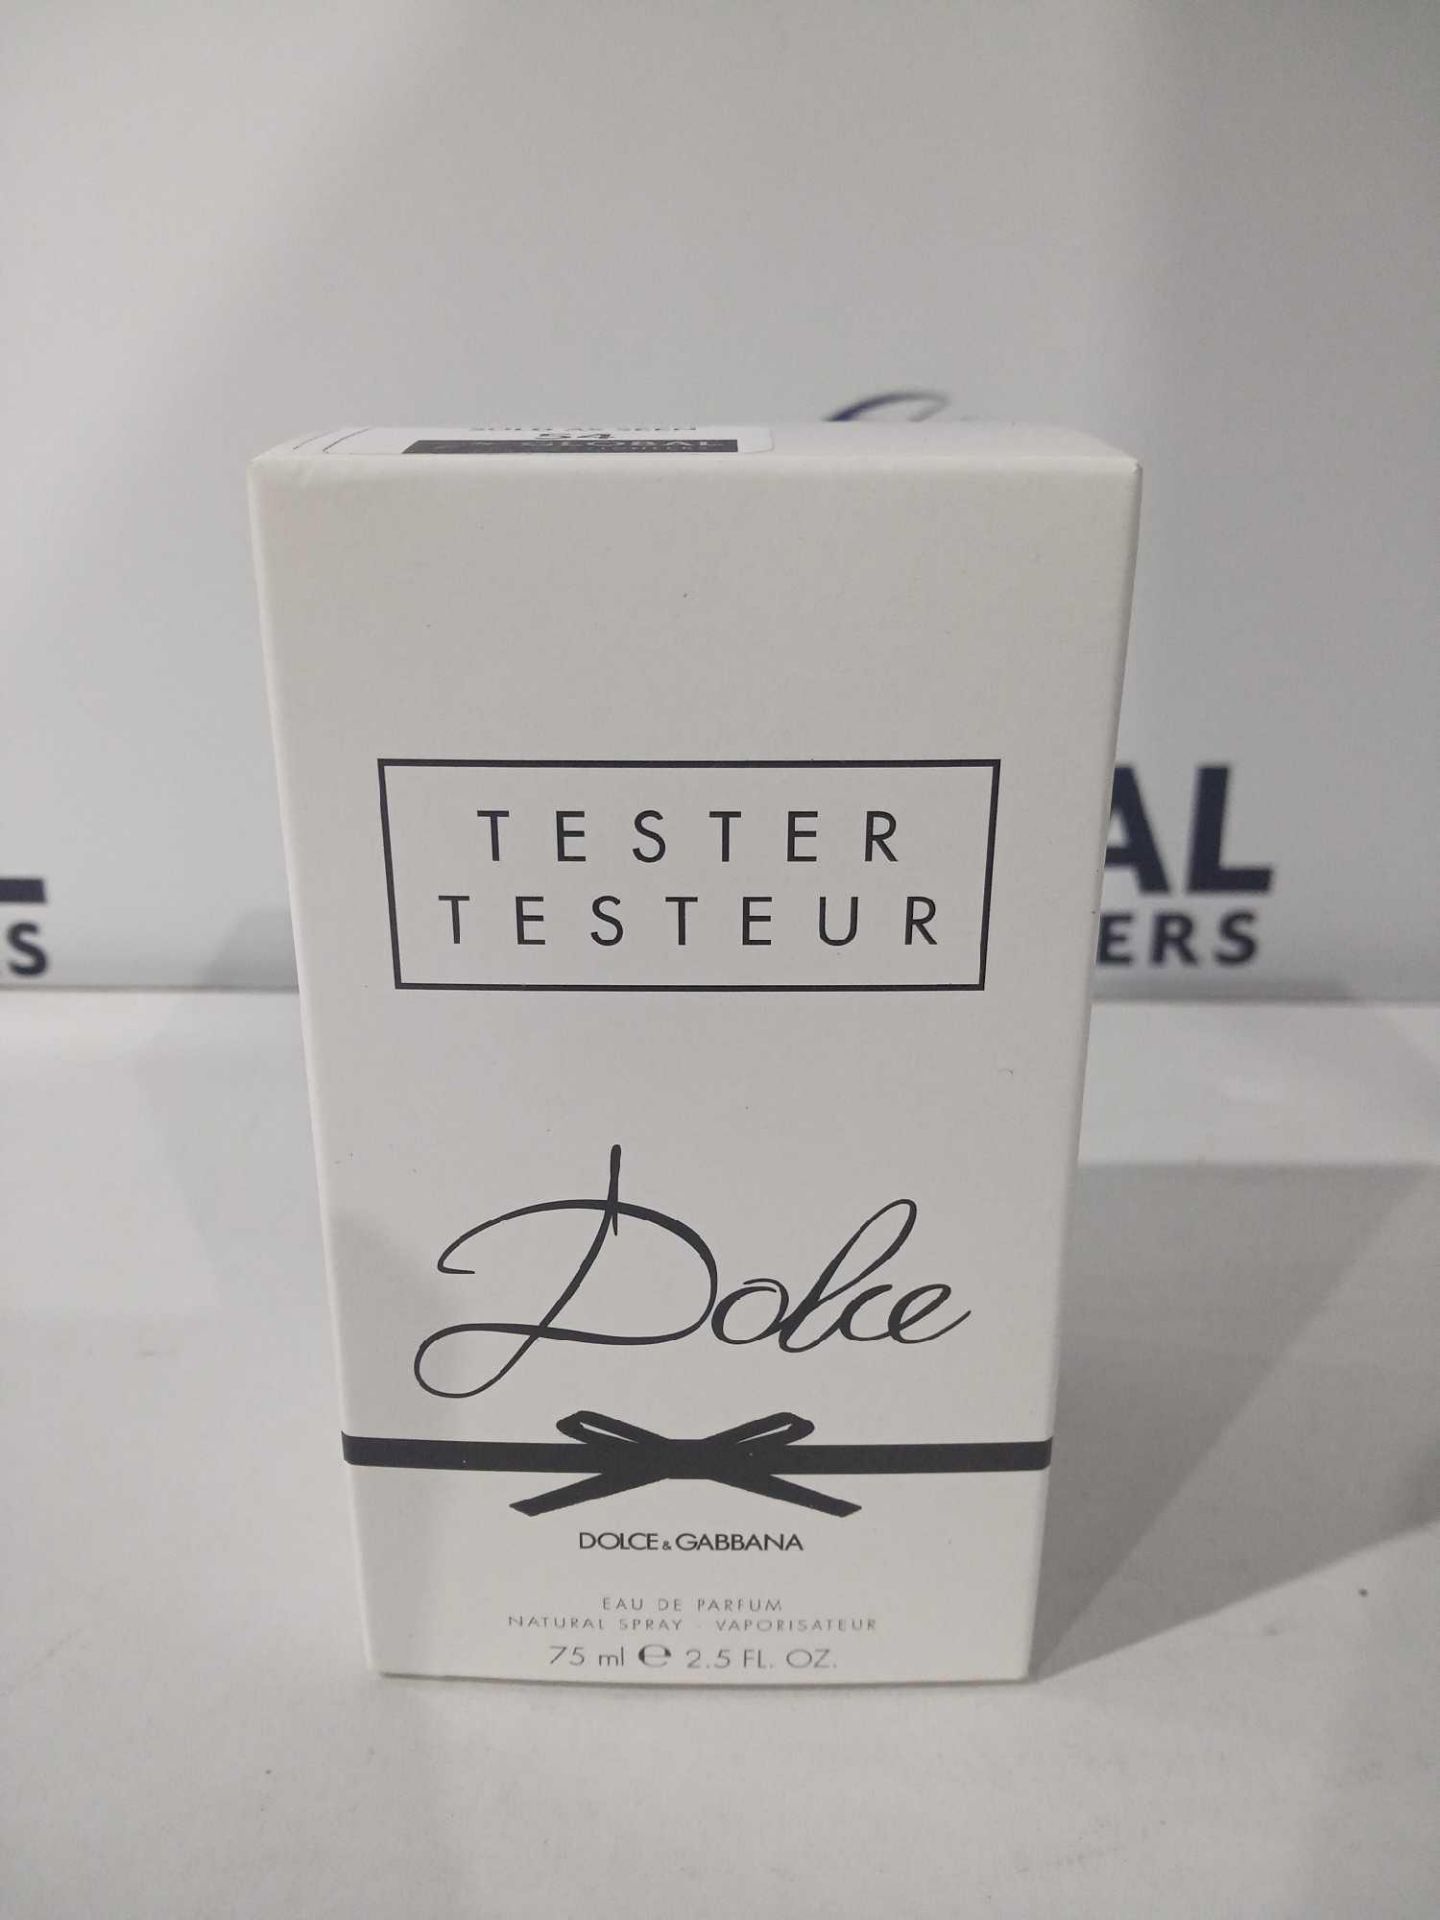 RRP £90 Brand New Boxed Full 75 Ml Tester Bottle Of Dolce By Dolce And Gabbana Perfume Spray